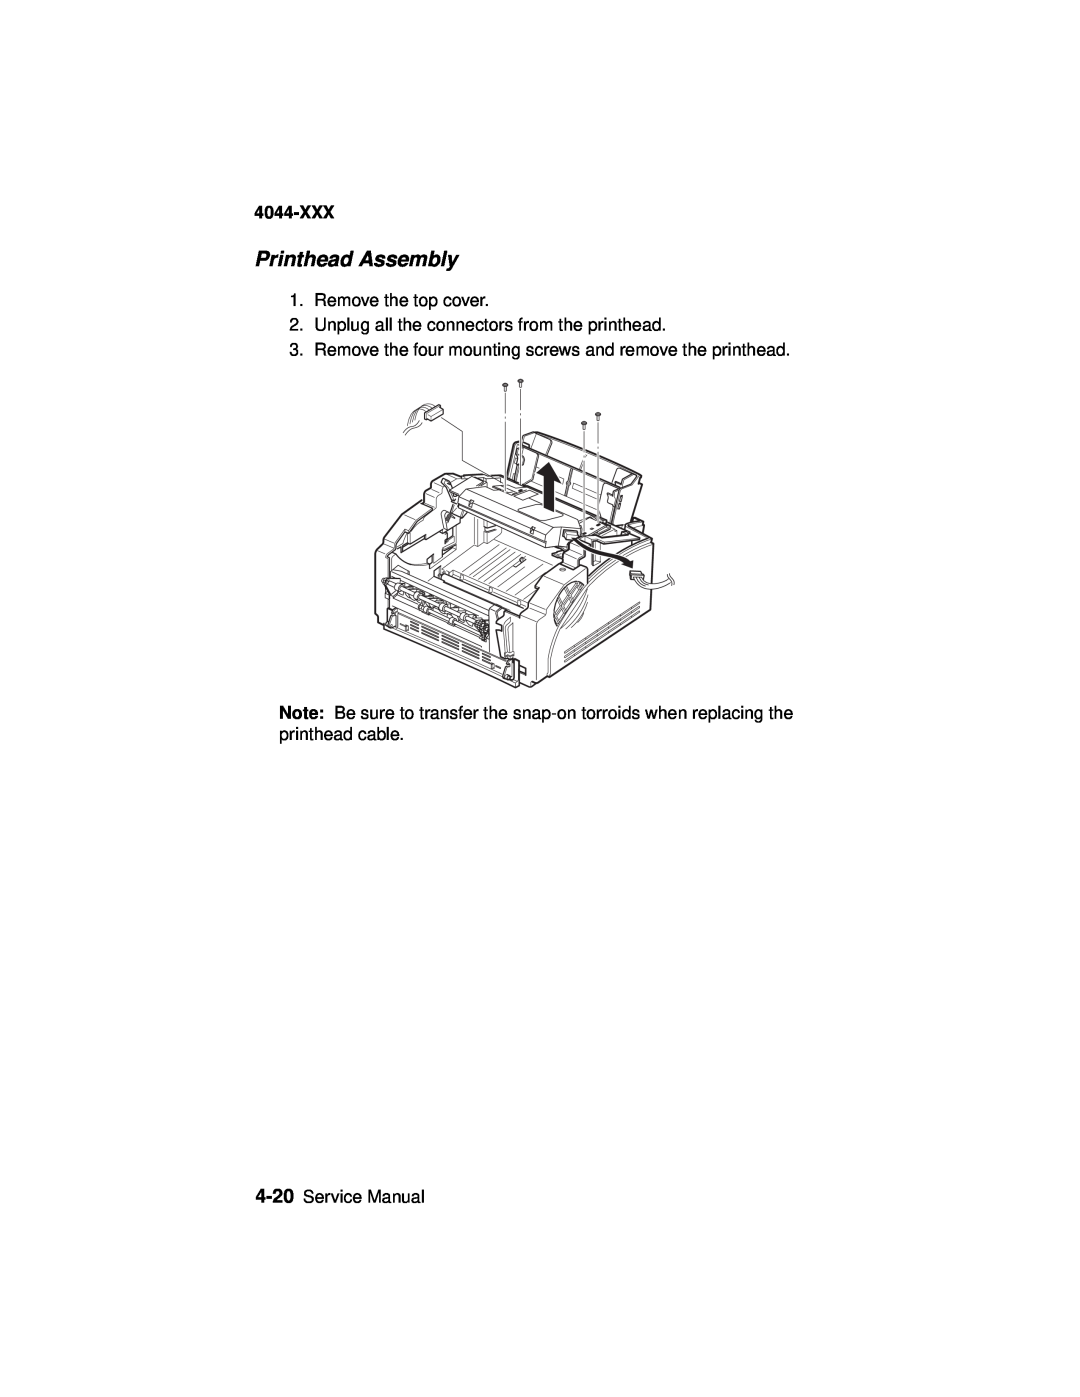 Lexmark 4044-XXX Printhead Assembly, Remove the top cover, Unplug all the connectors from the printhead, Service Manual 